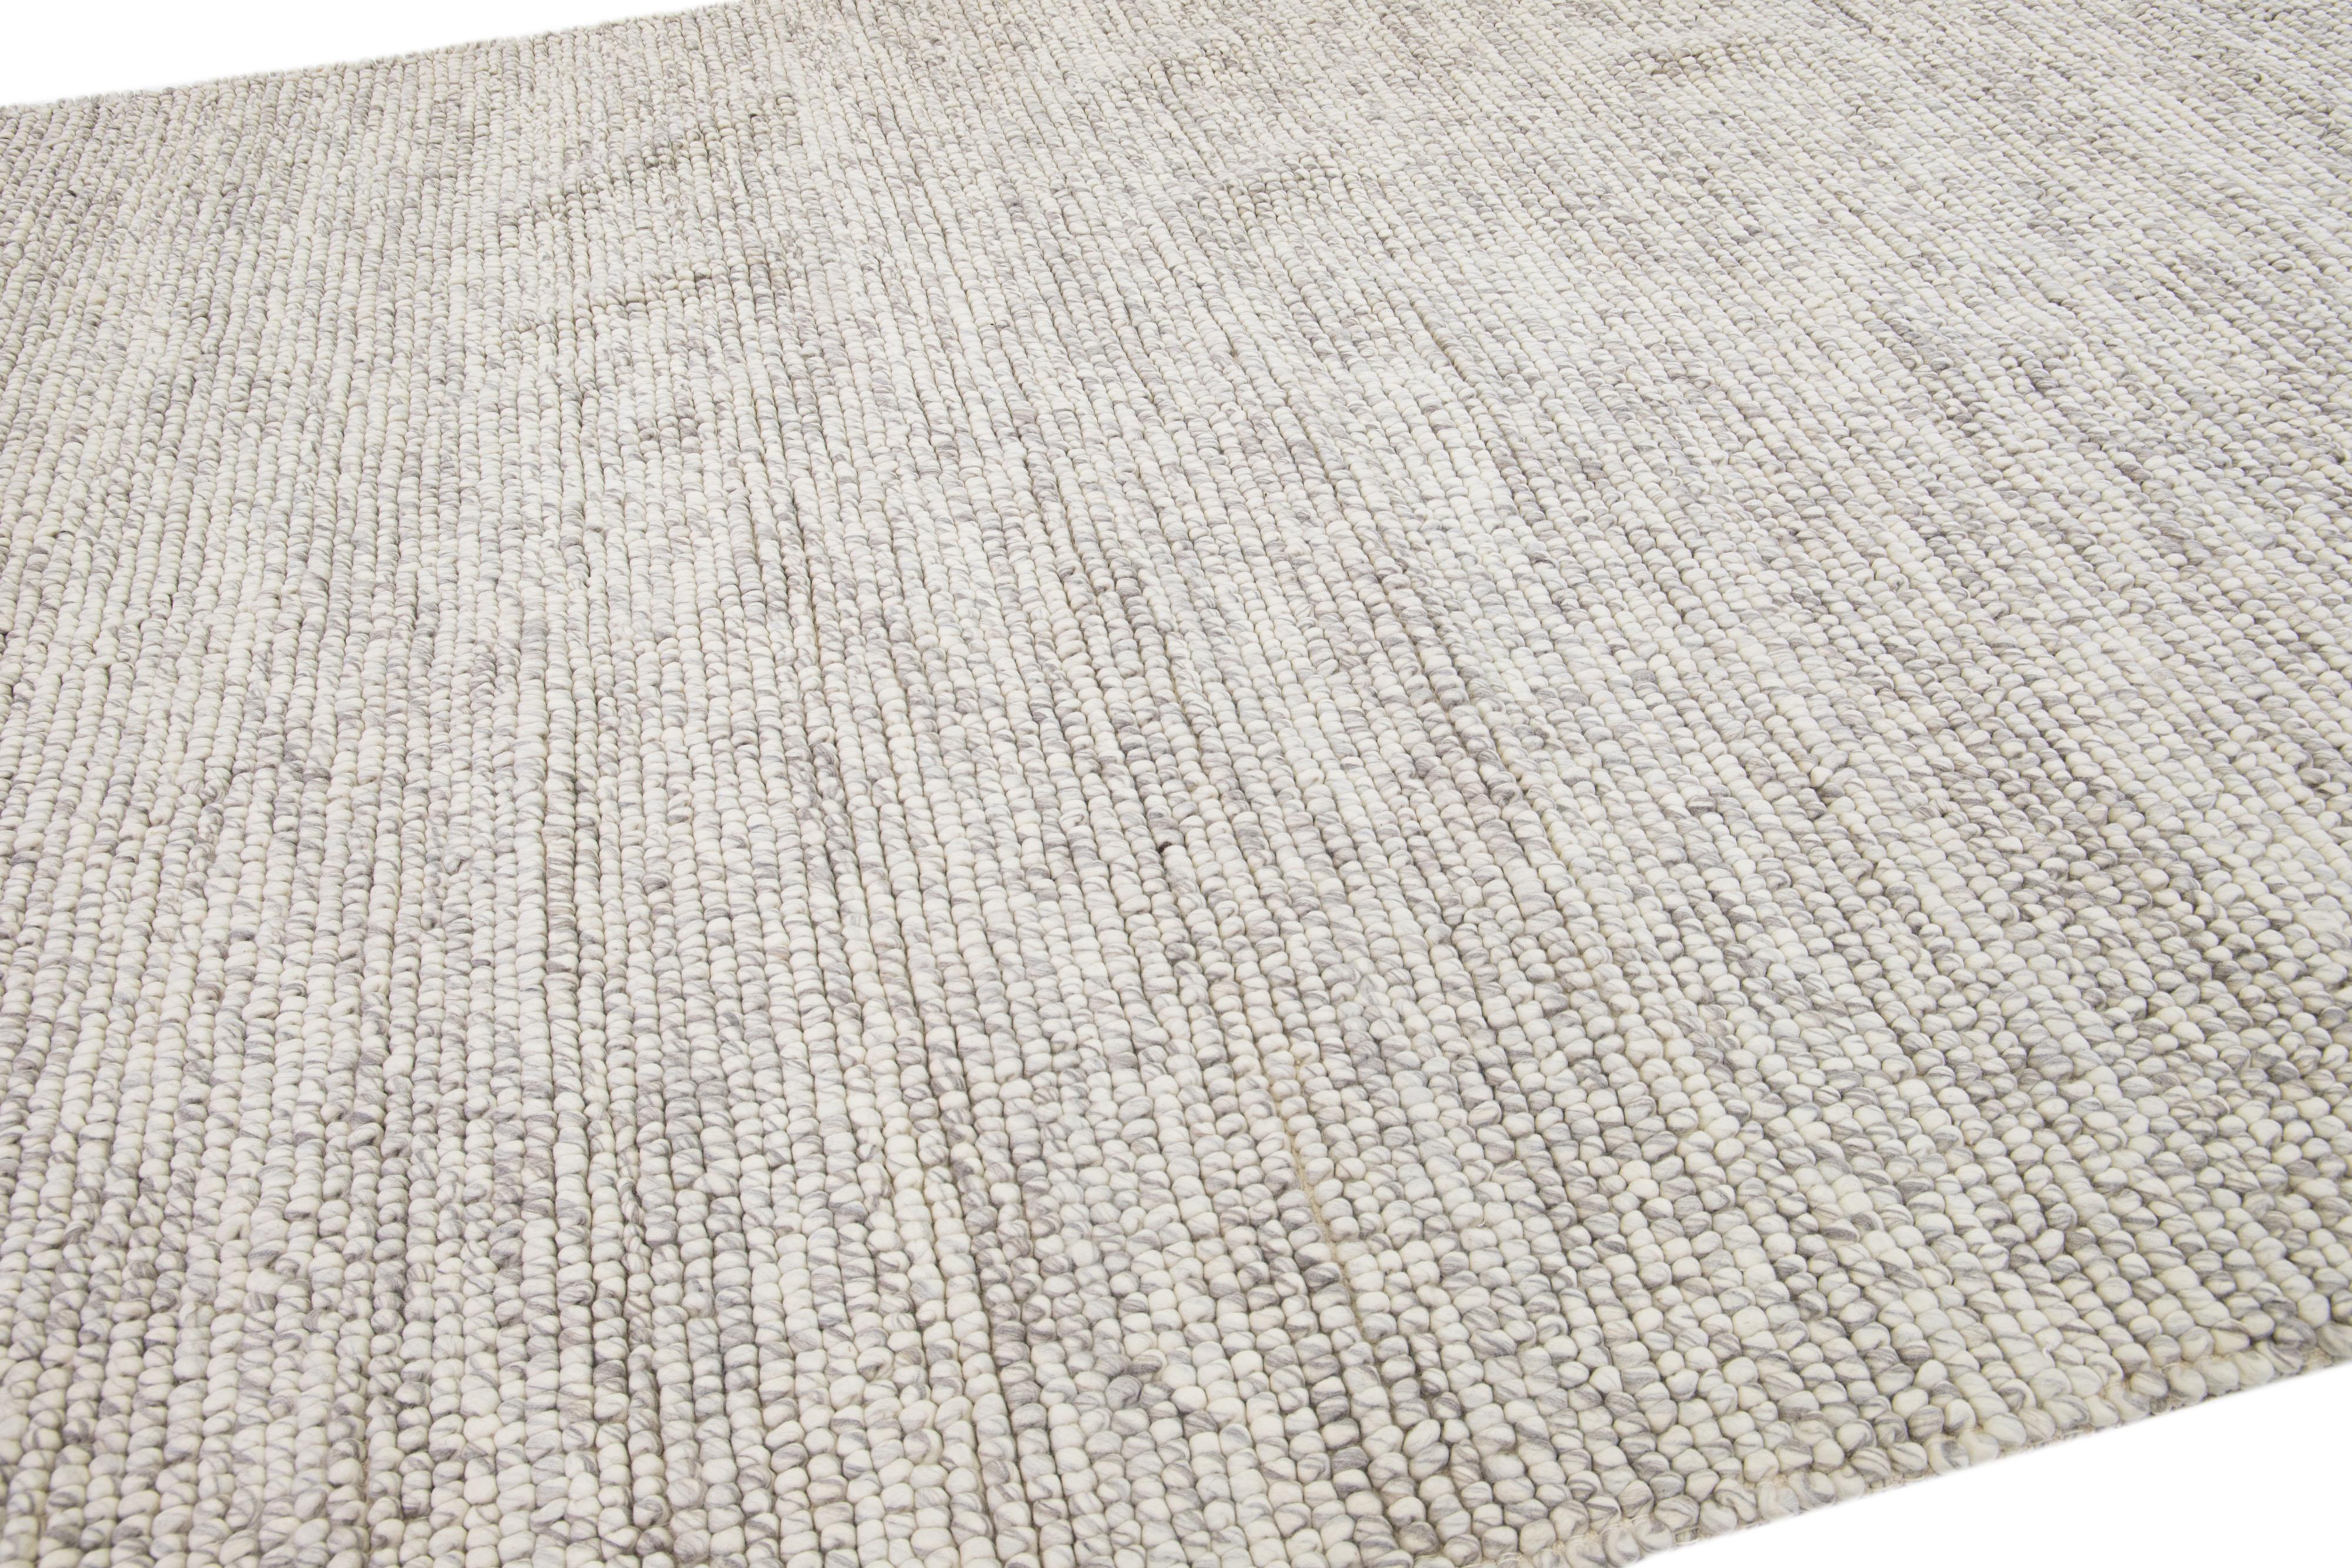 This beautiful Felt hand-woven wool rug is part of our Westport Collection with a beige color field and features an all-over geometric design.

This rug measures: 9' x 12'.

Custom colors and sizes are available upon request.

 